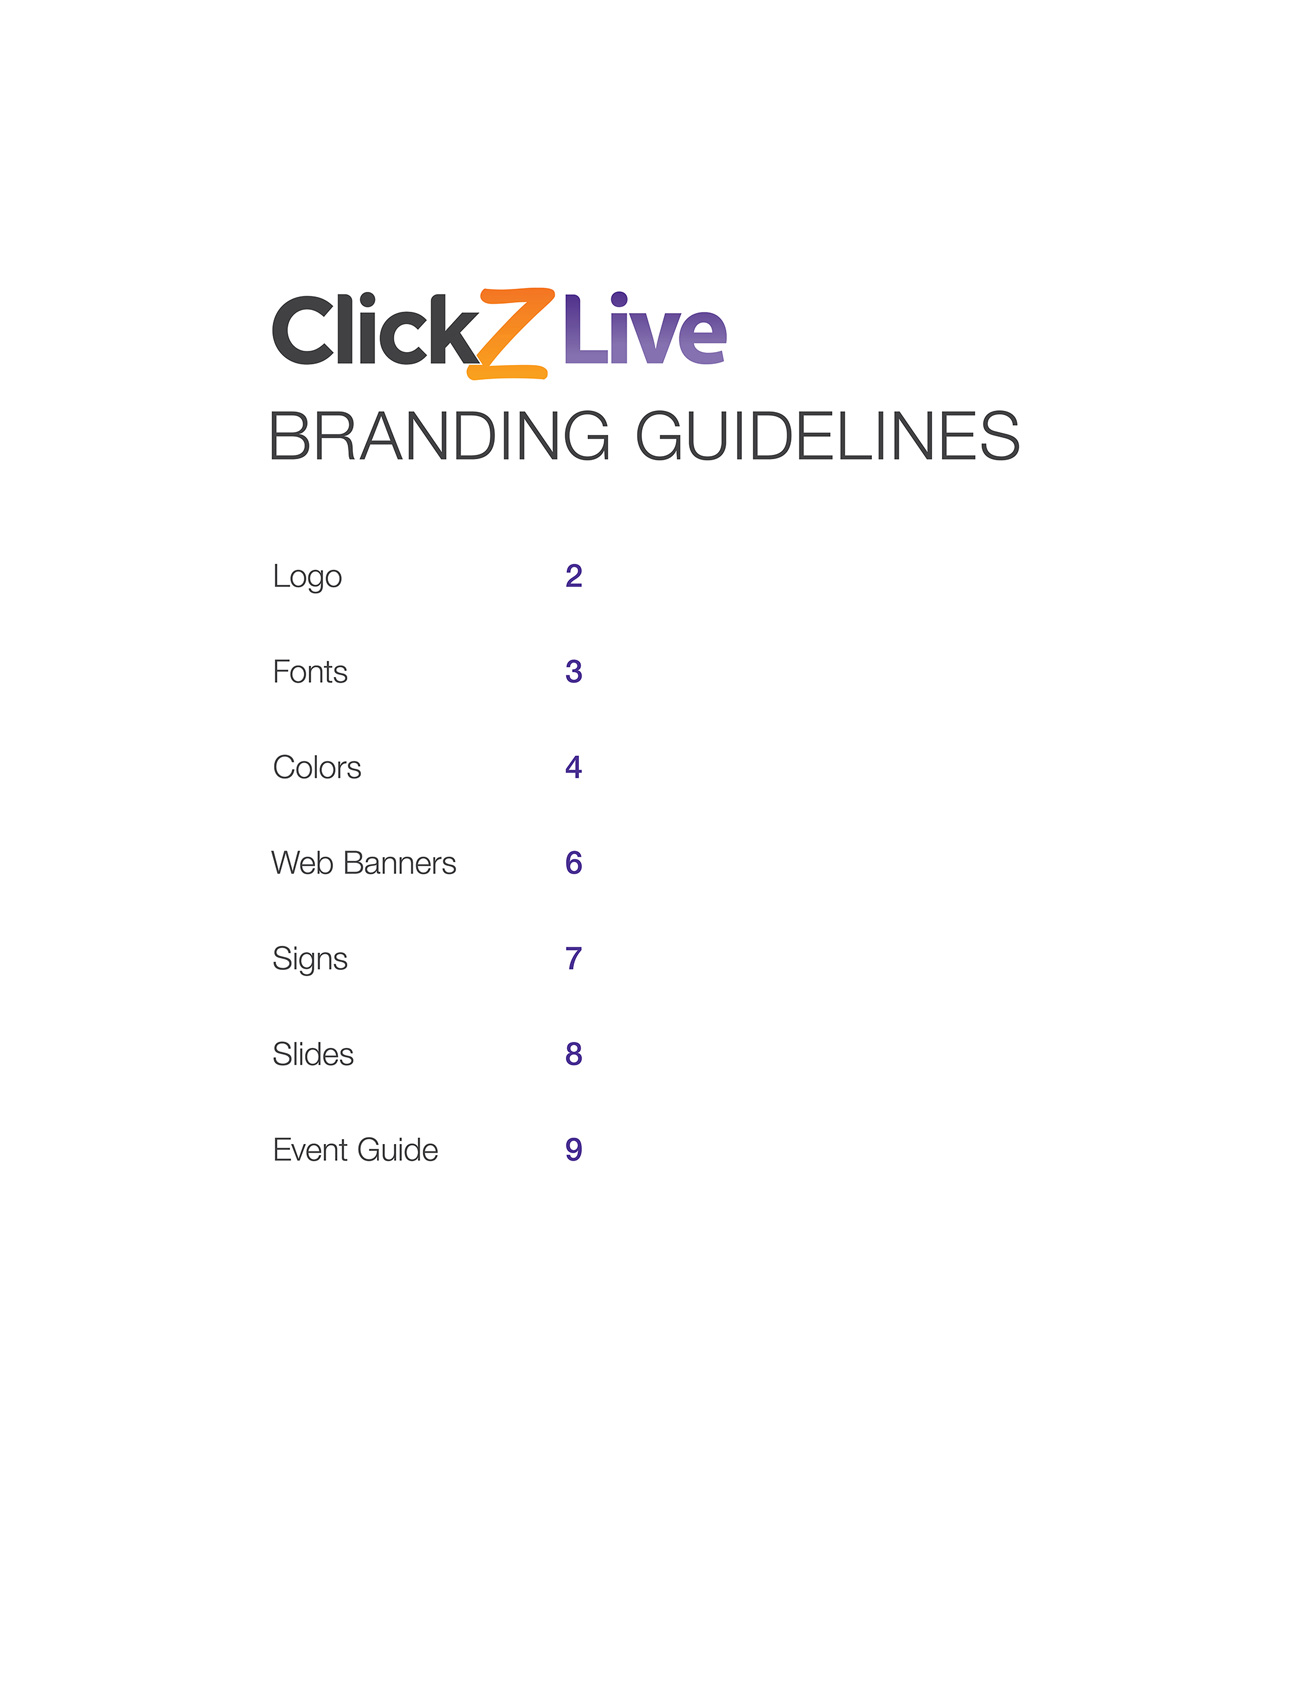 Cover of the branding guidelines for the ClickZ Live conference series. Includes ClickZ Live logo, which is orange, purple, and dark grey. Also includes table of contents in purple and dark-grey text.